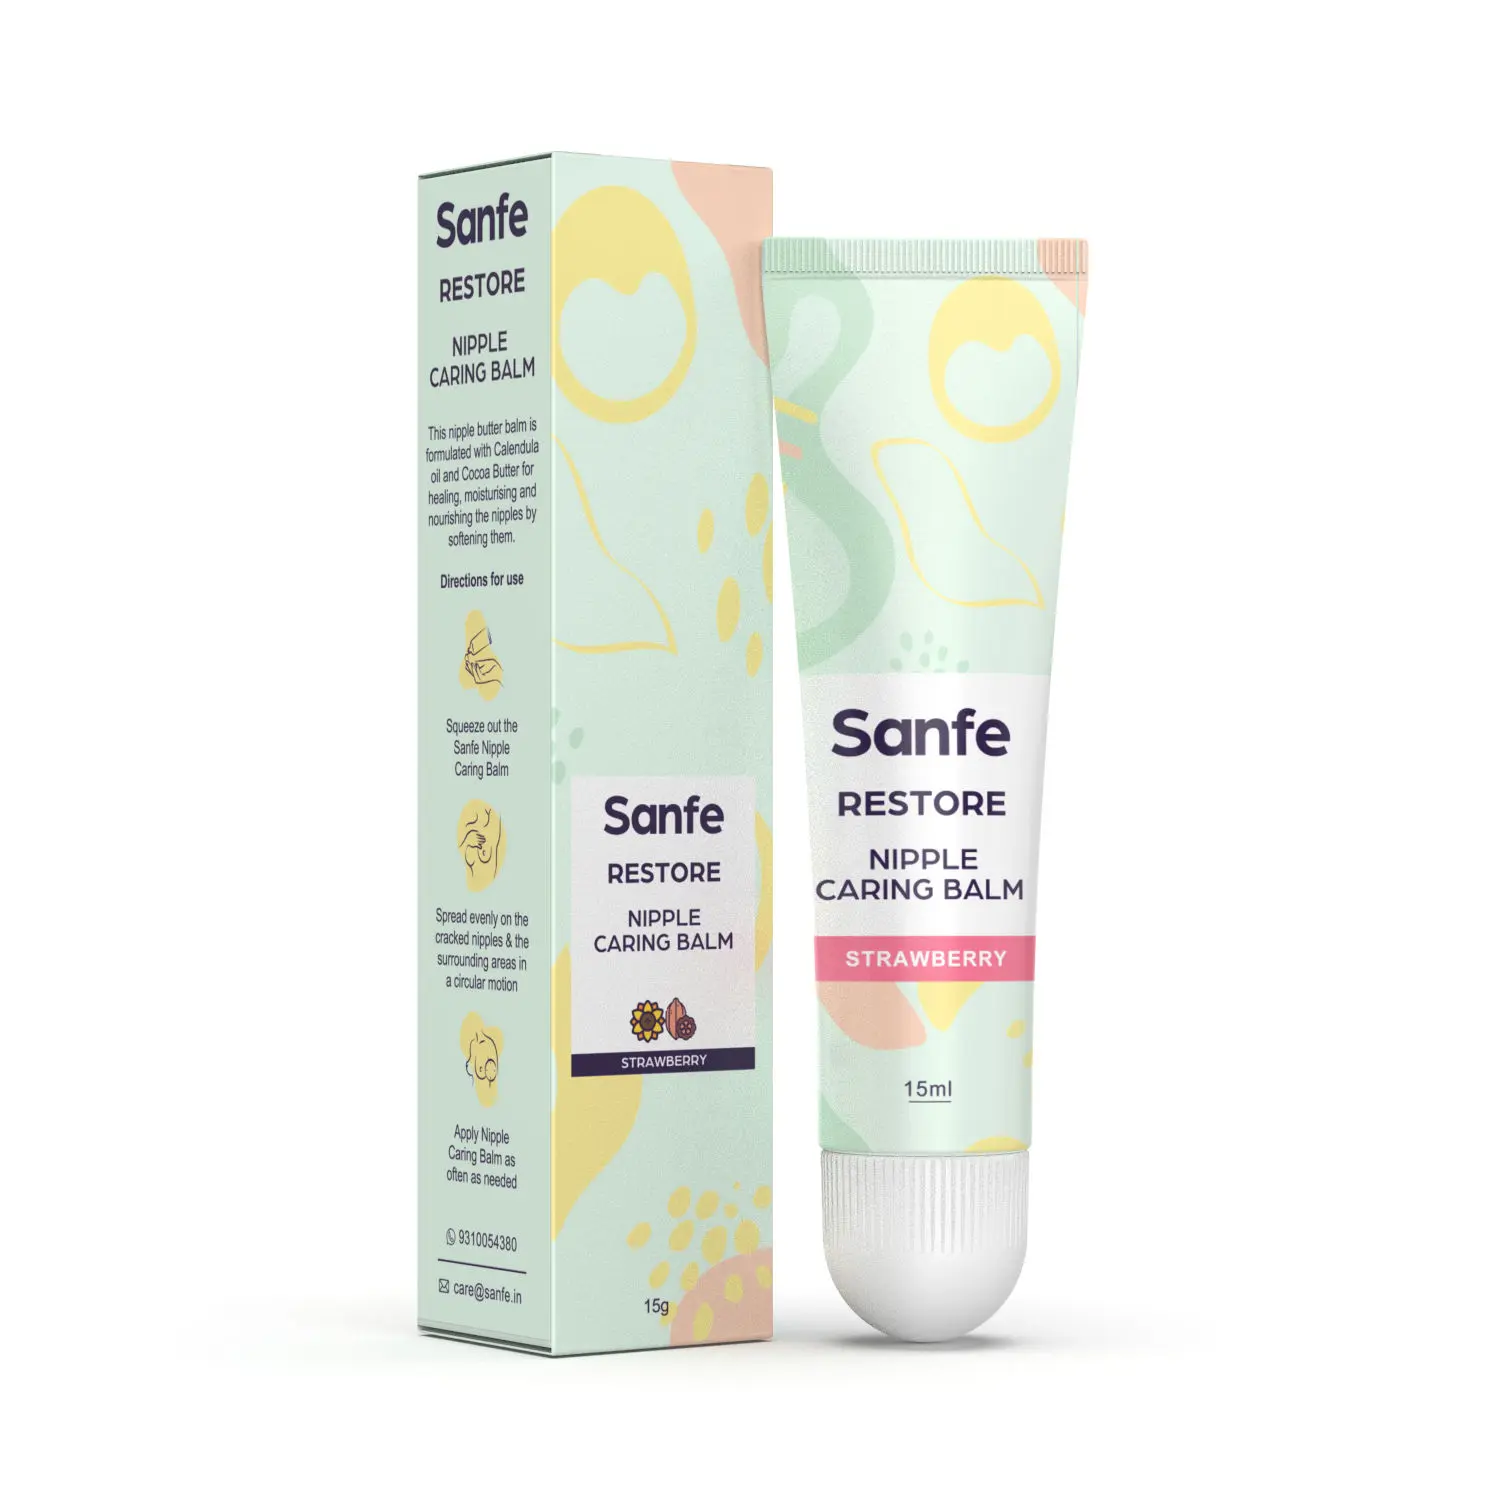 Sanfe Breast Nipple Caring Balm for New Mothers - 15gm with -Strawberry & Cocoa Butter Extracts with 3 in 1 Healing Properties